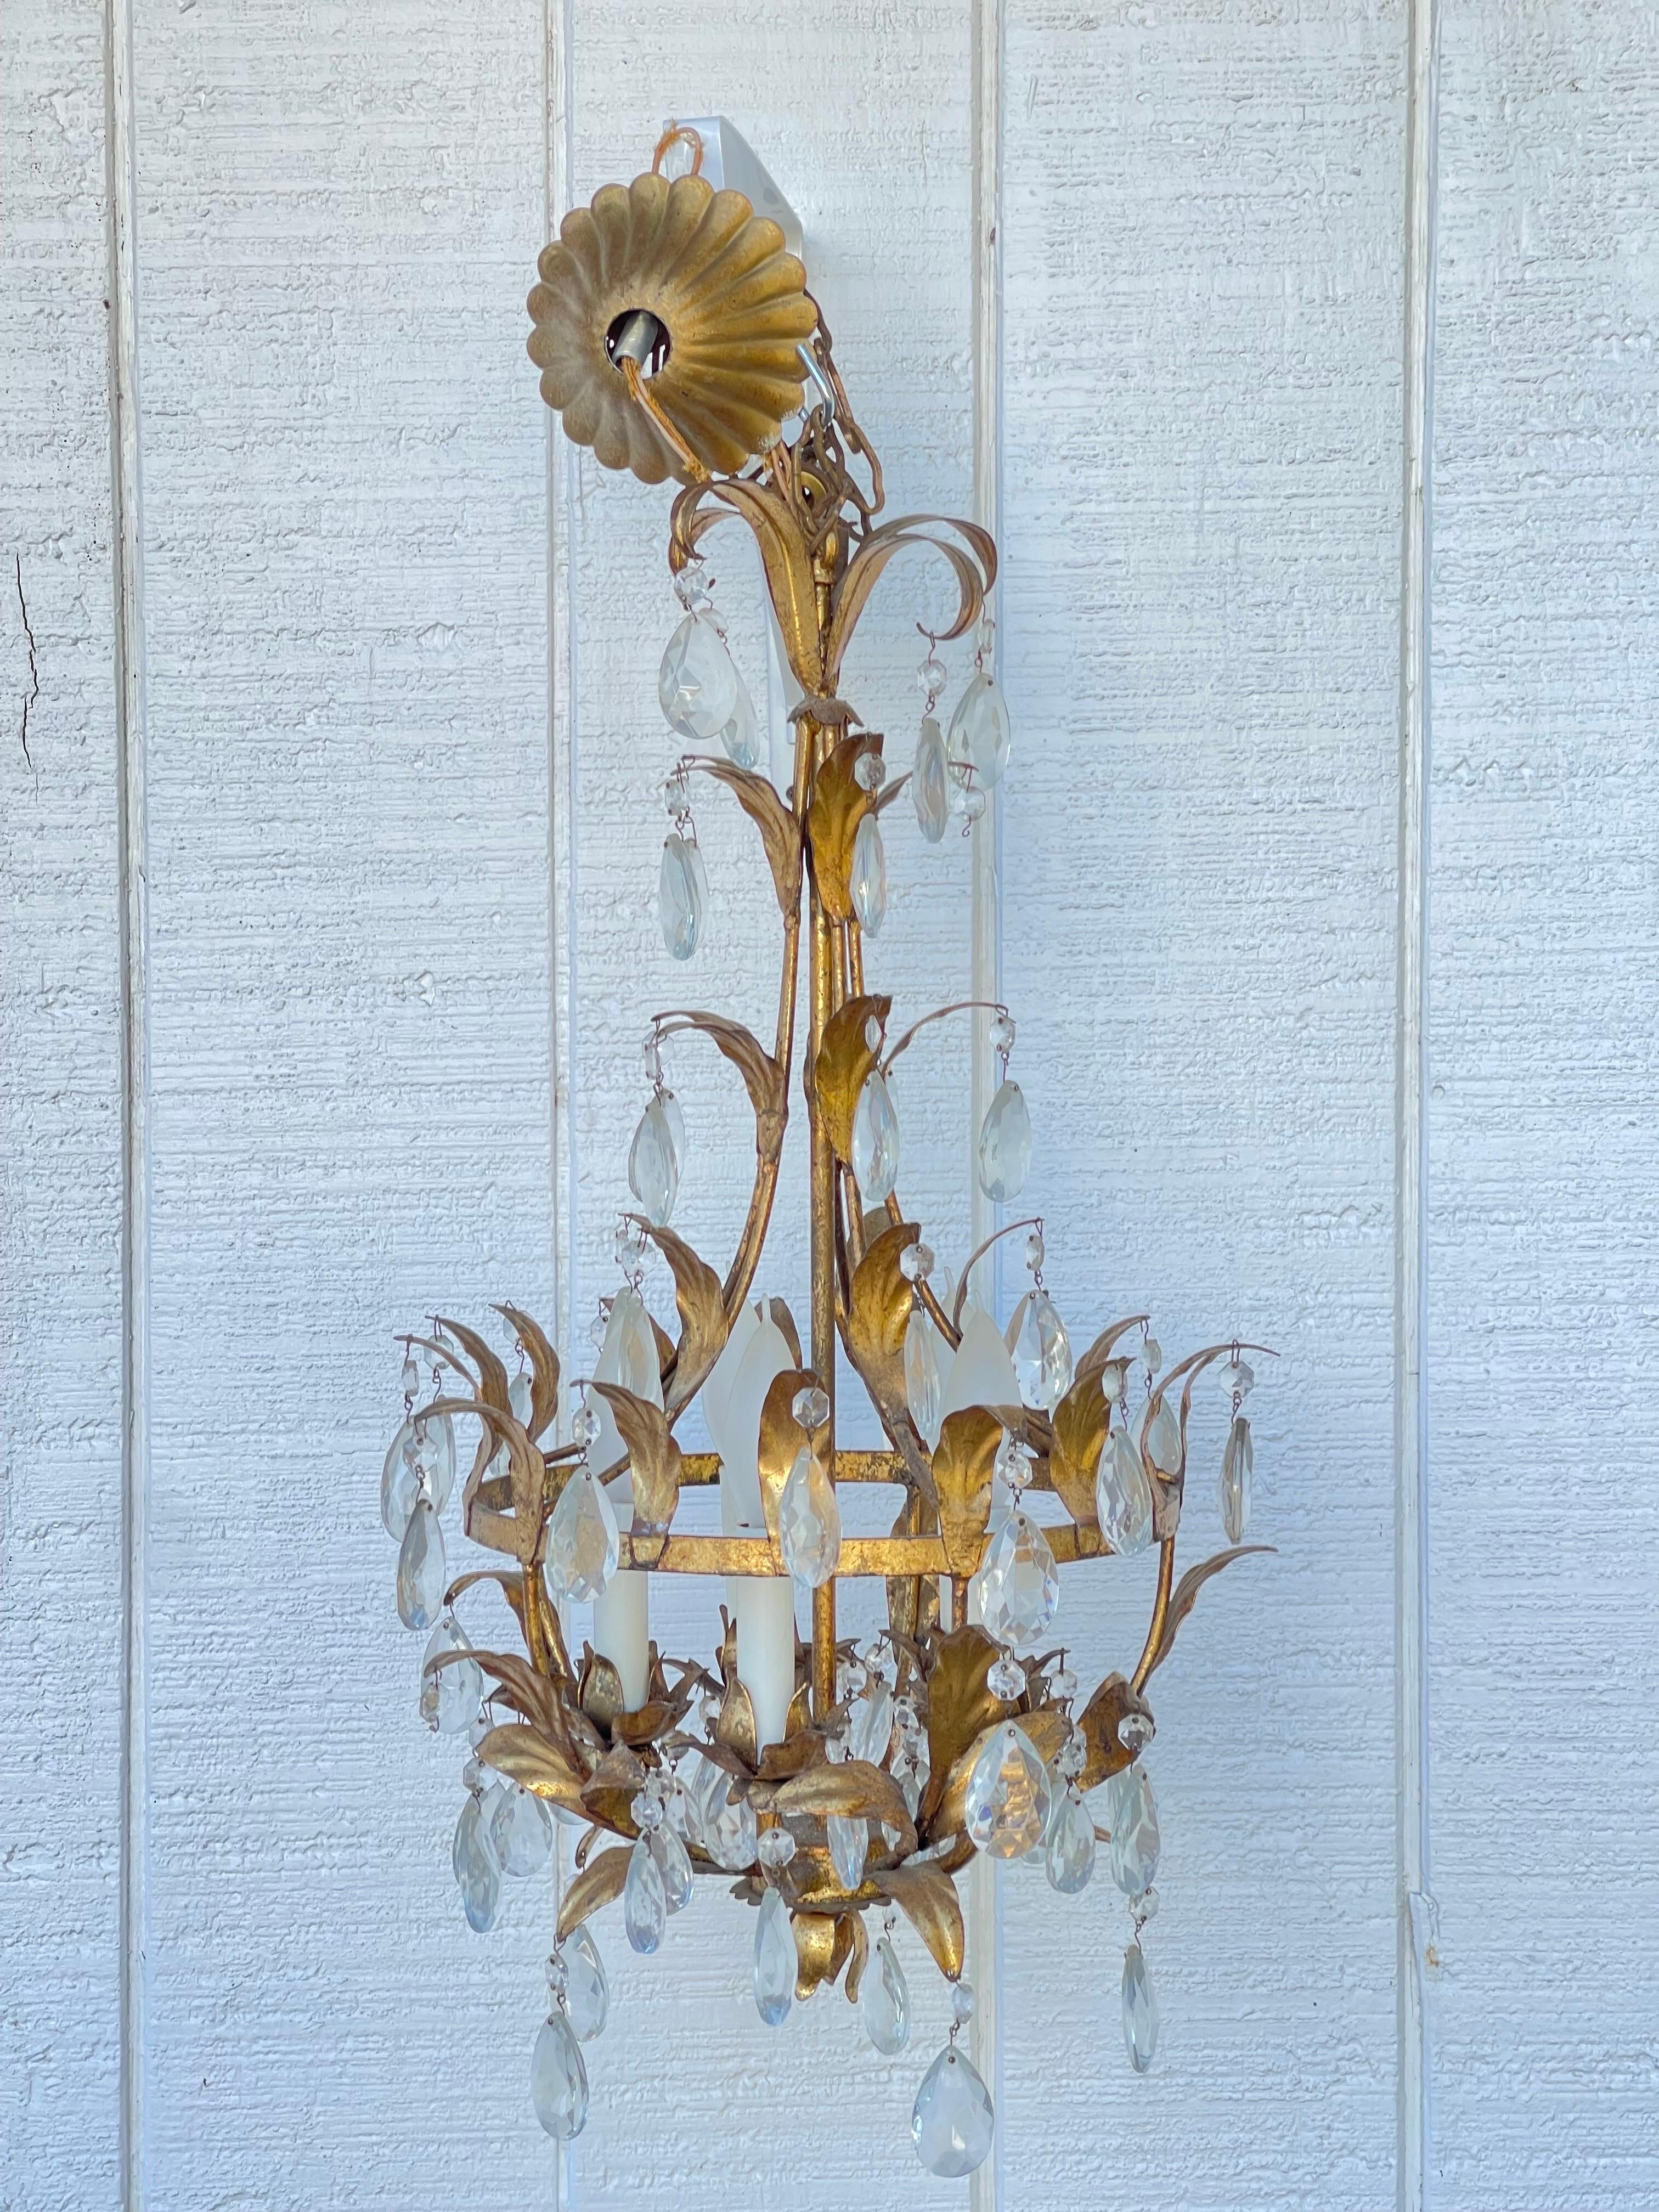 Italian Gilt Tole Chandelier. Highly glamorous this six light chandelier would be perfect in a powder room or entryway.  Stamped with a metal tag 